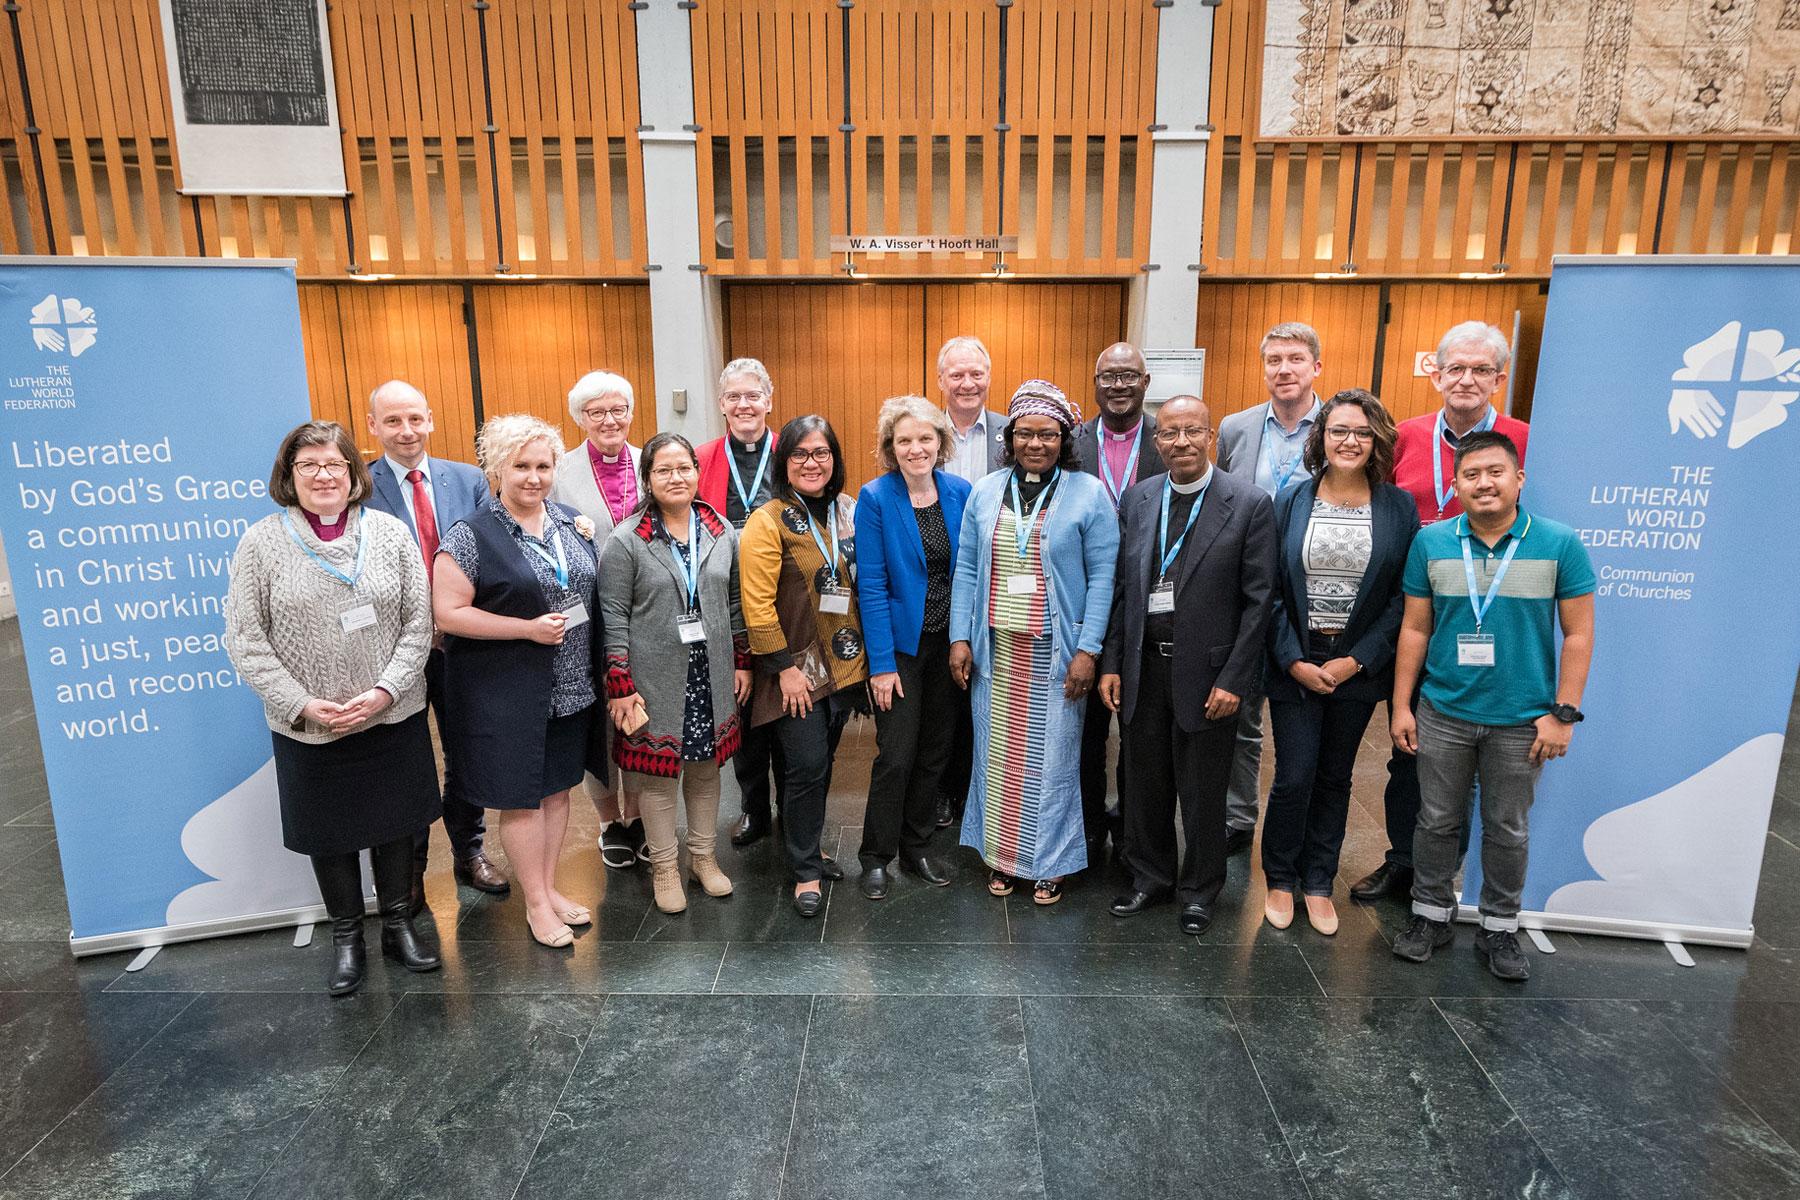 The LWF executive committee meeting, in anticipation of the Council meeting 2019 met in Geneva on 12 June. Photo: LWF/Albin Hillert